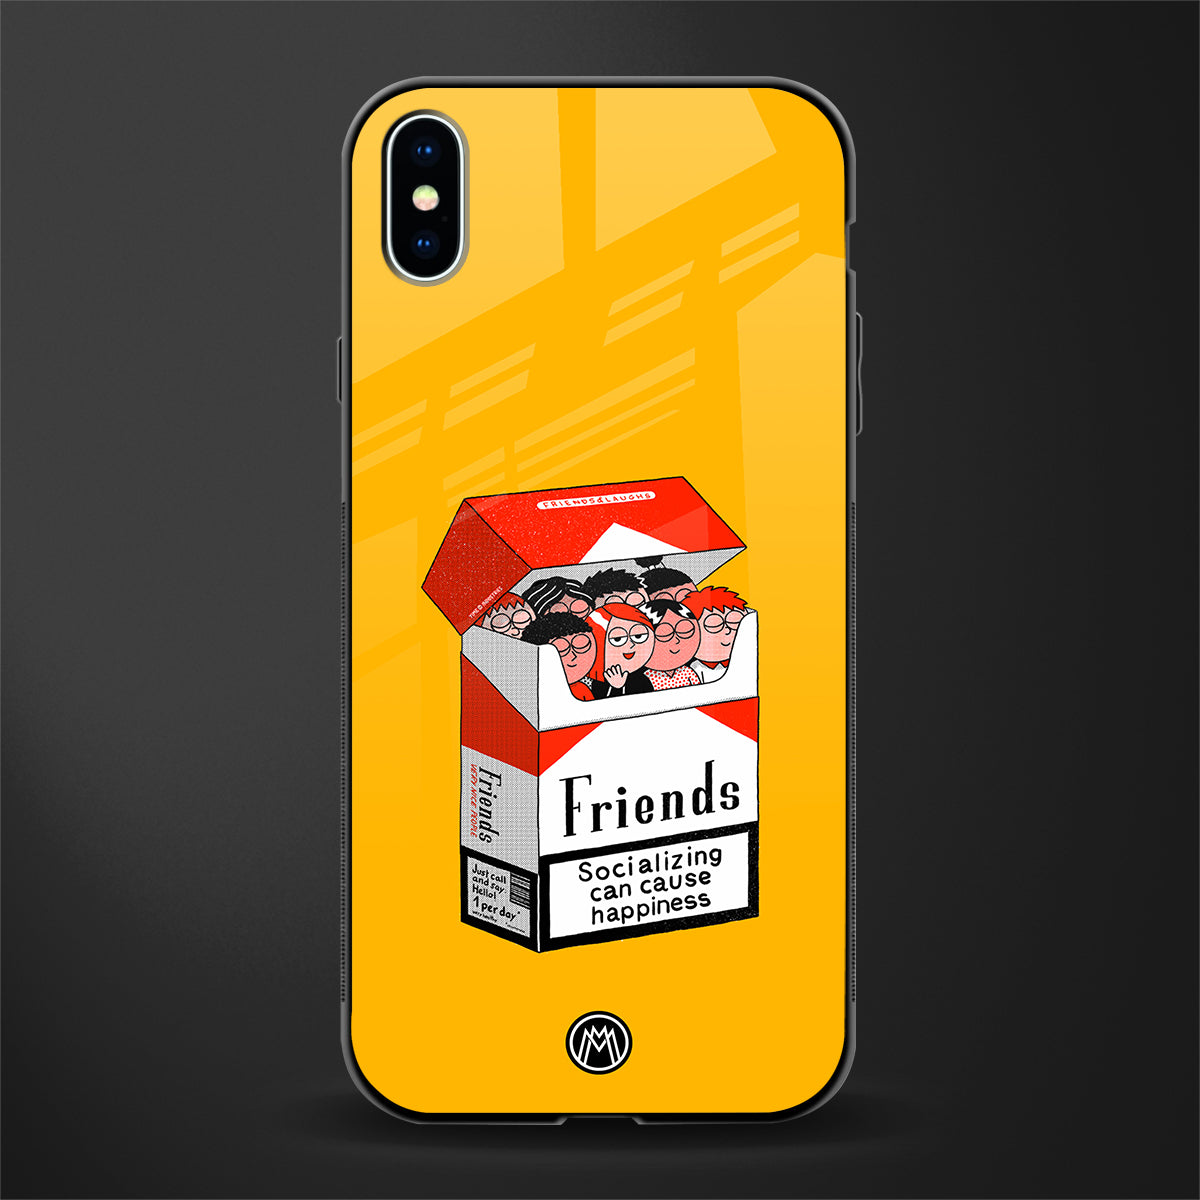 socializing can cause happiness glass case for iphone xs max image